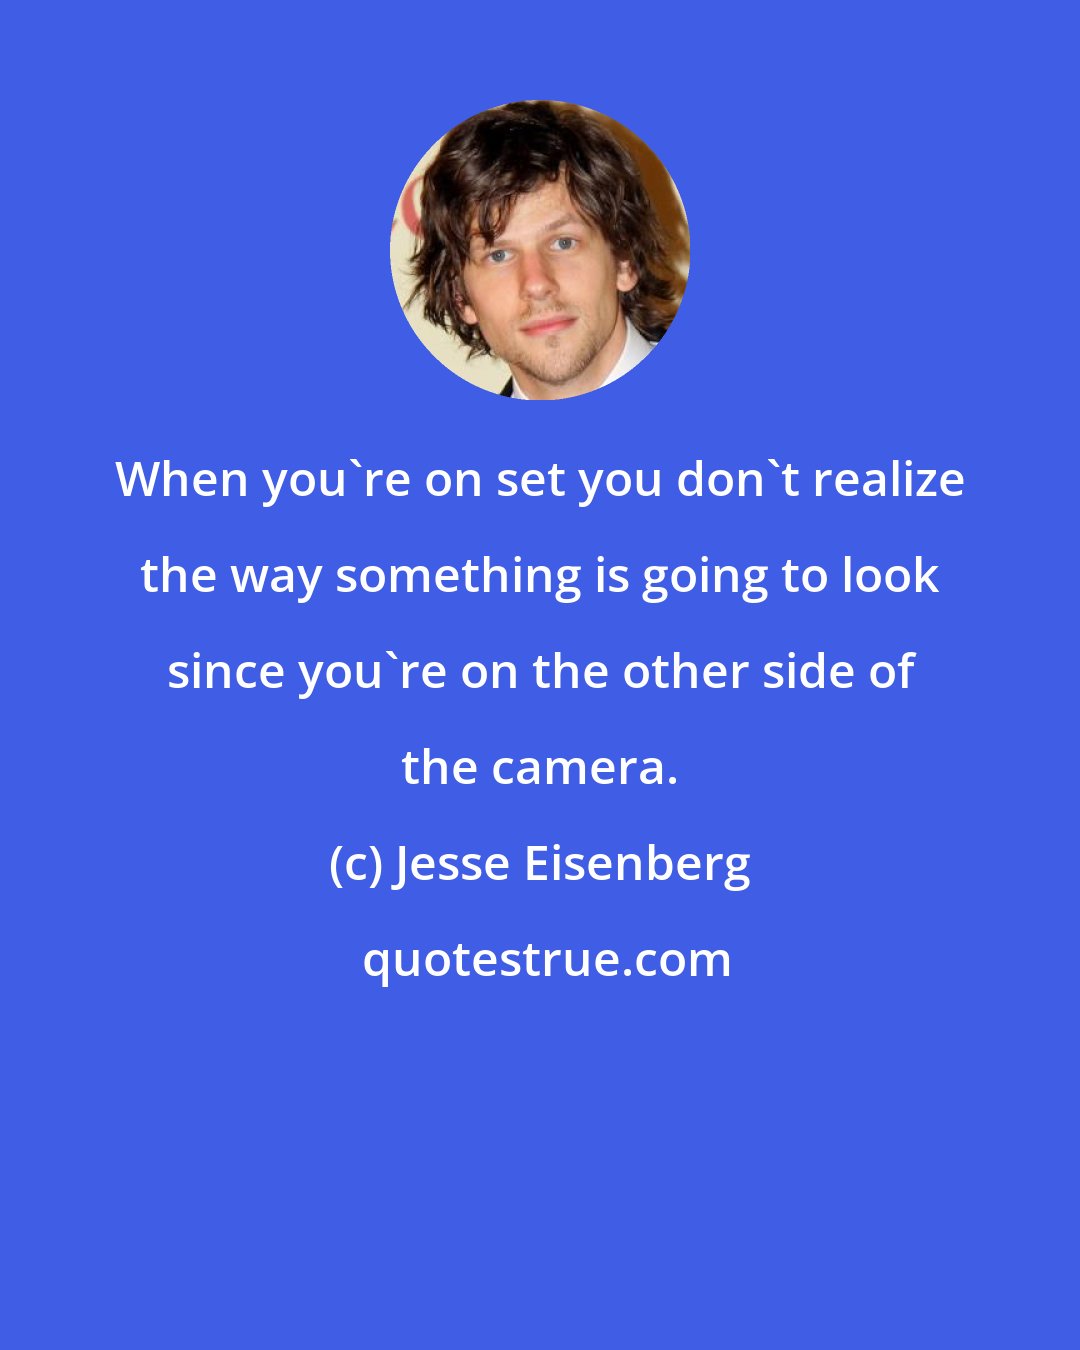 Jesse Eisenberg: When you're on set you don't realize the way something is going to look since you're on the other side of the camera.